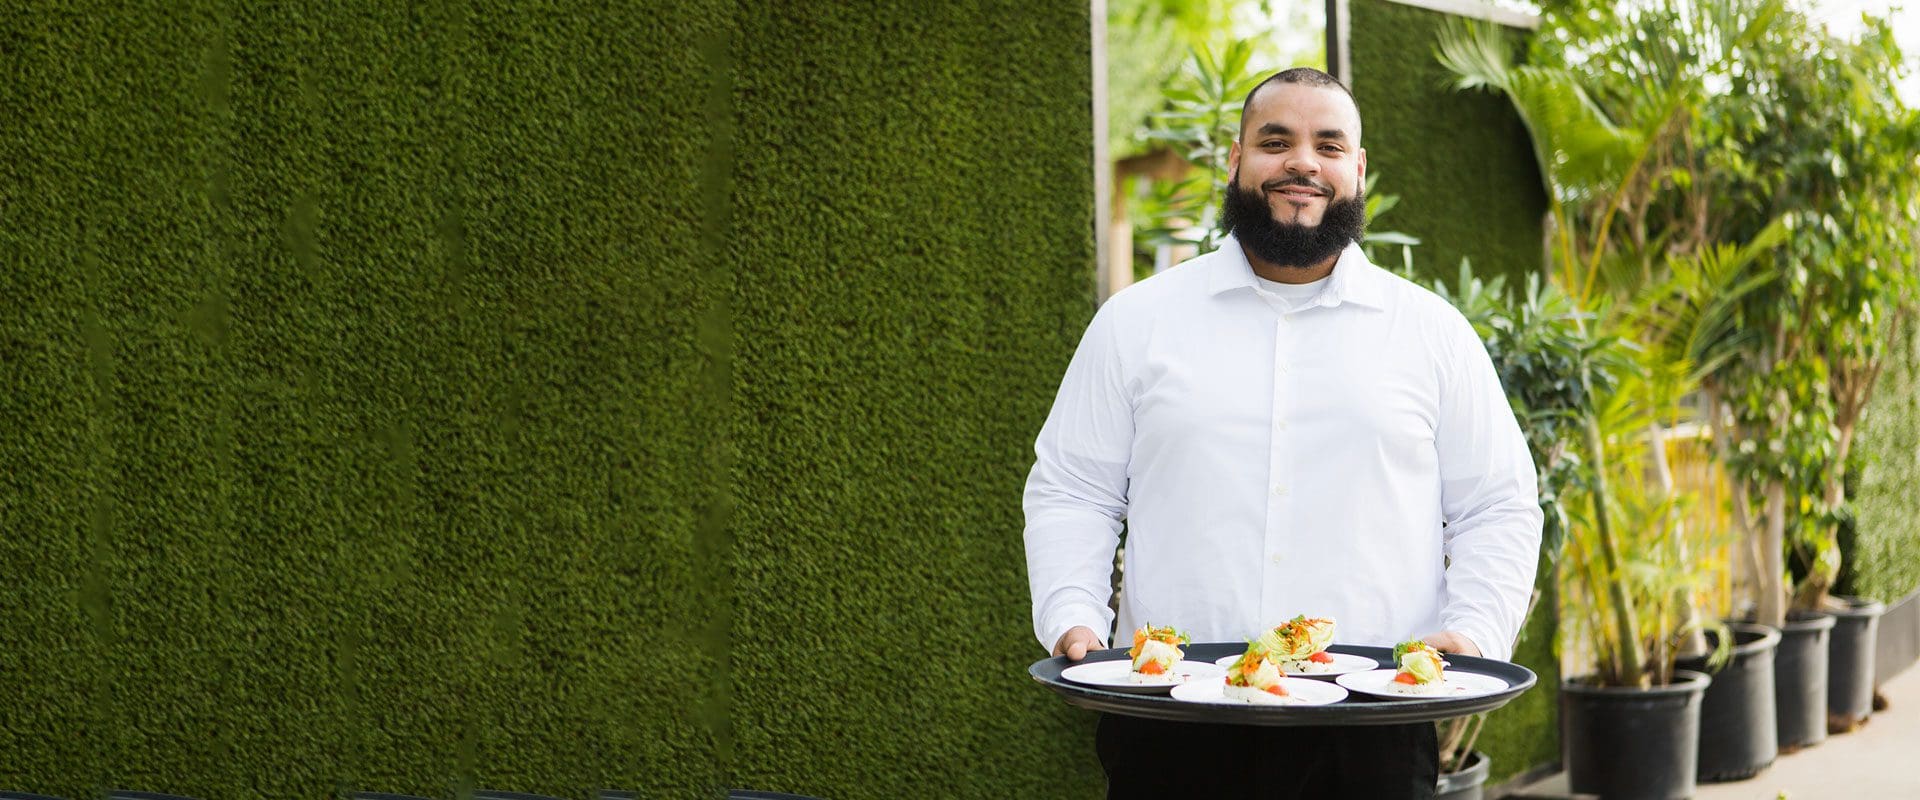 Waiter holding tray of food while smiling at camera